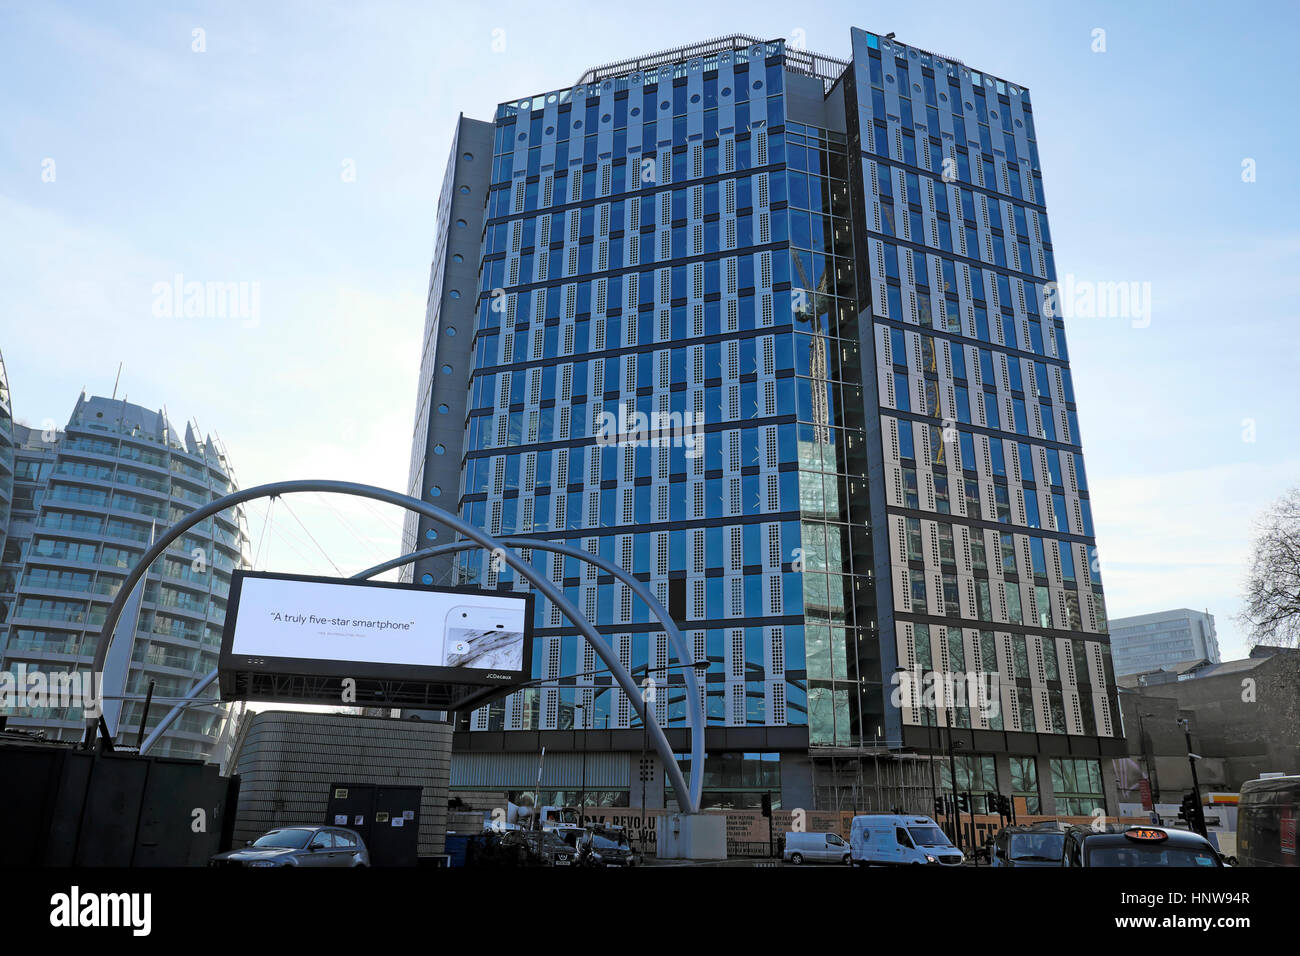 White Collar Factory new office building exterior view at Old Street Silicon Roundabout in London England Britain UK  KATHY DEWITT Stock Photo